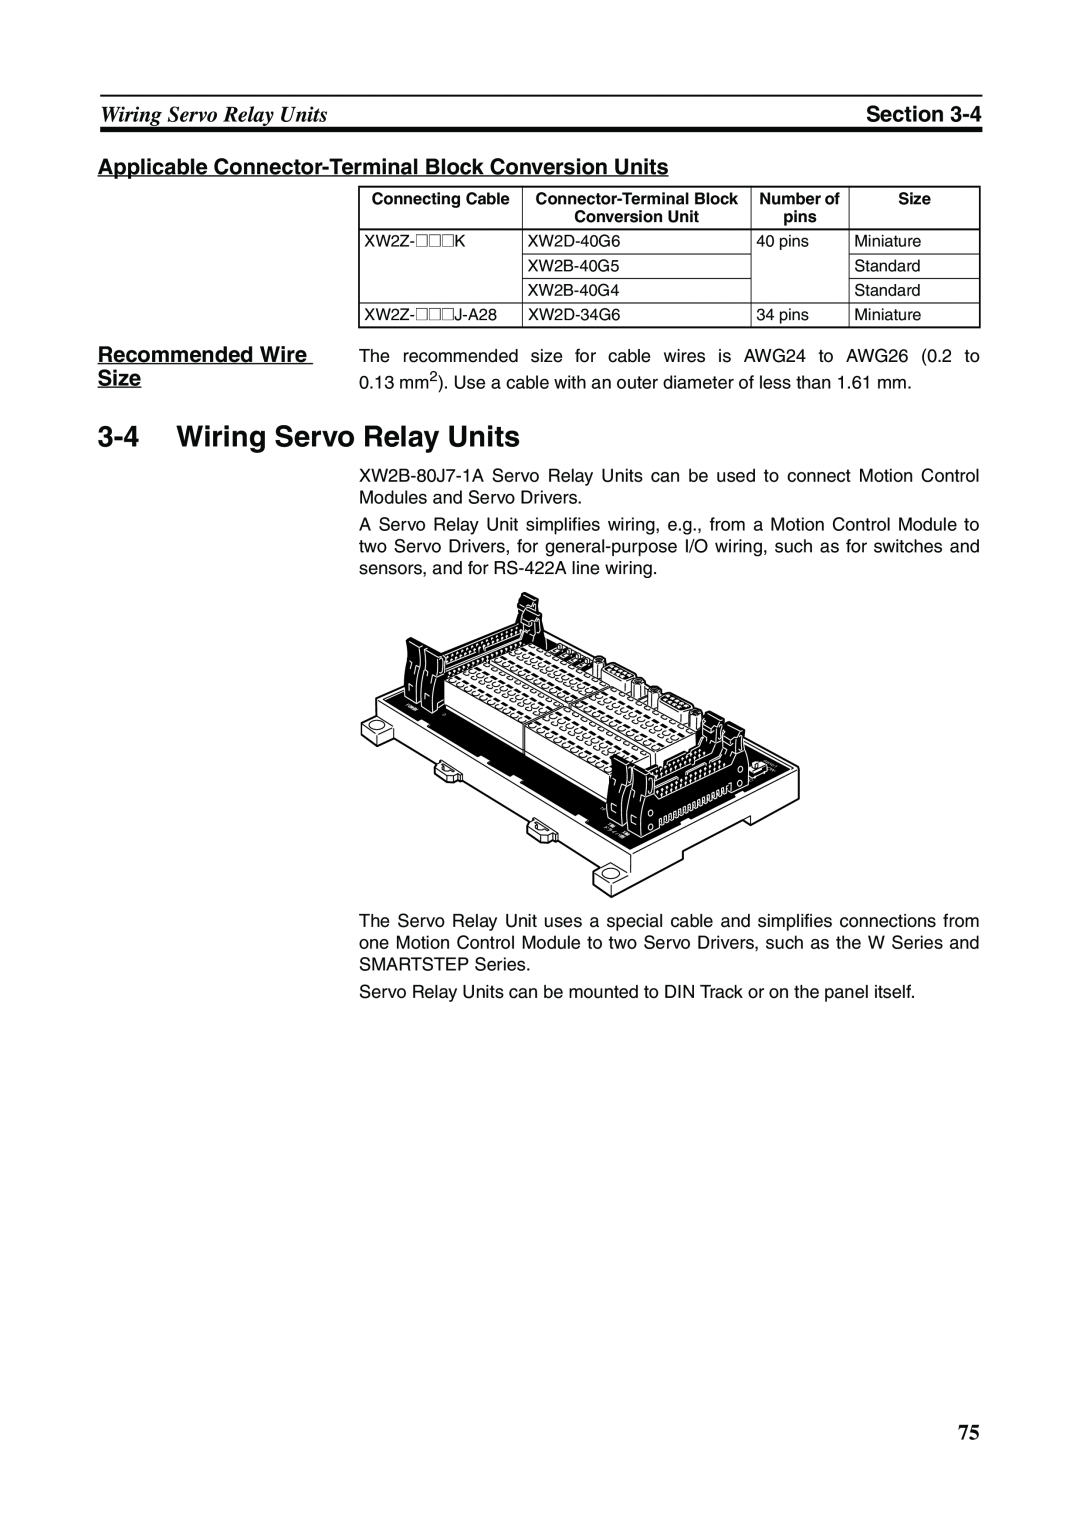 Omron FQM1-MMP21, FQM1-CM001, FQM1-MMA21 operation manual 3-4Wiring Servo Relay Units, Section, Recommended Wire Size 